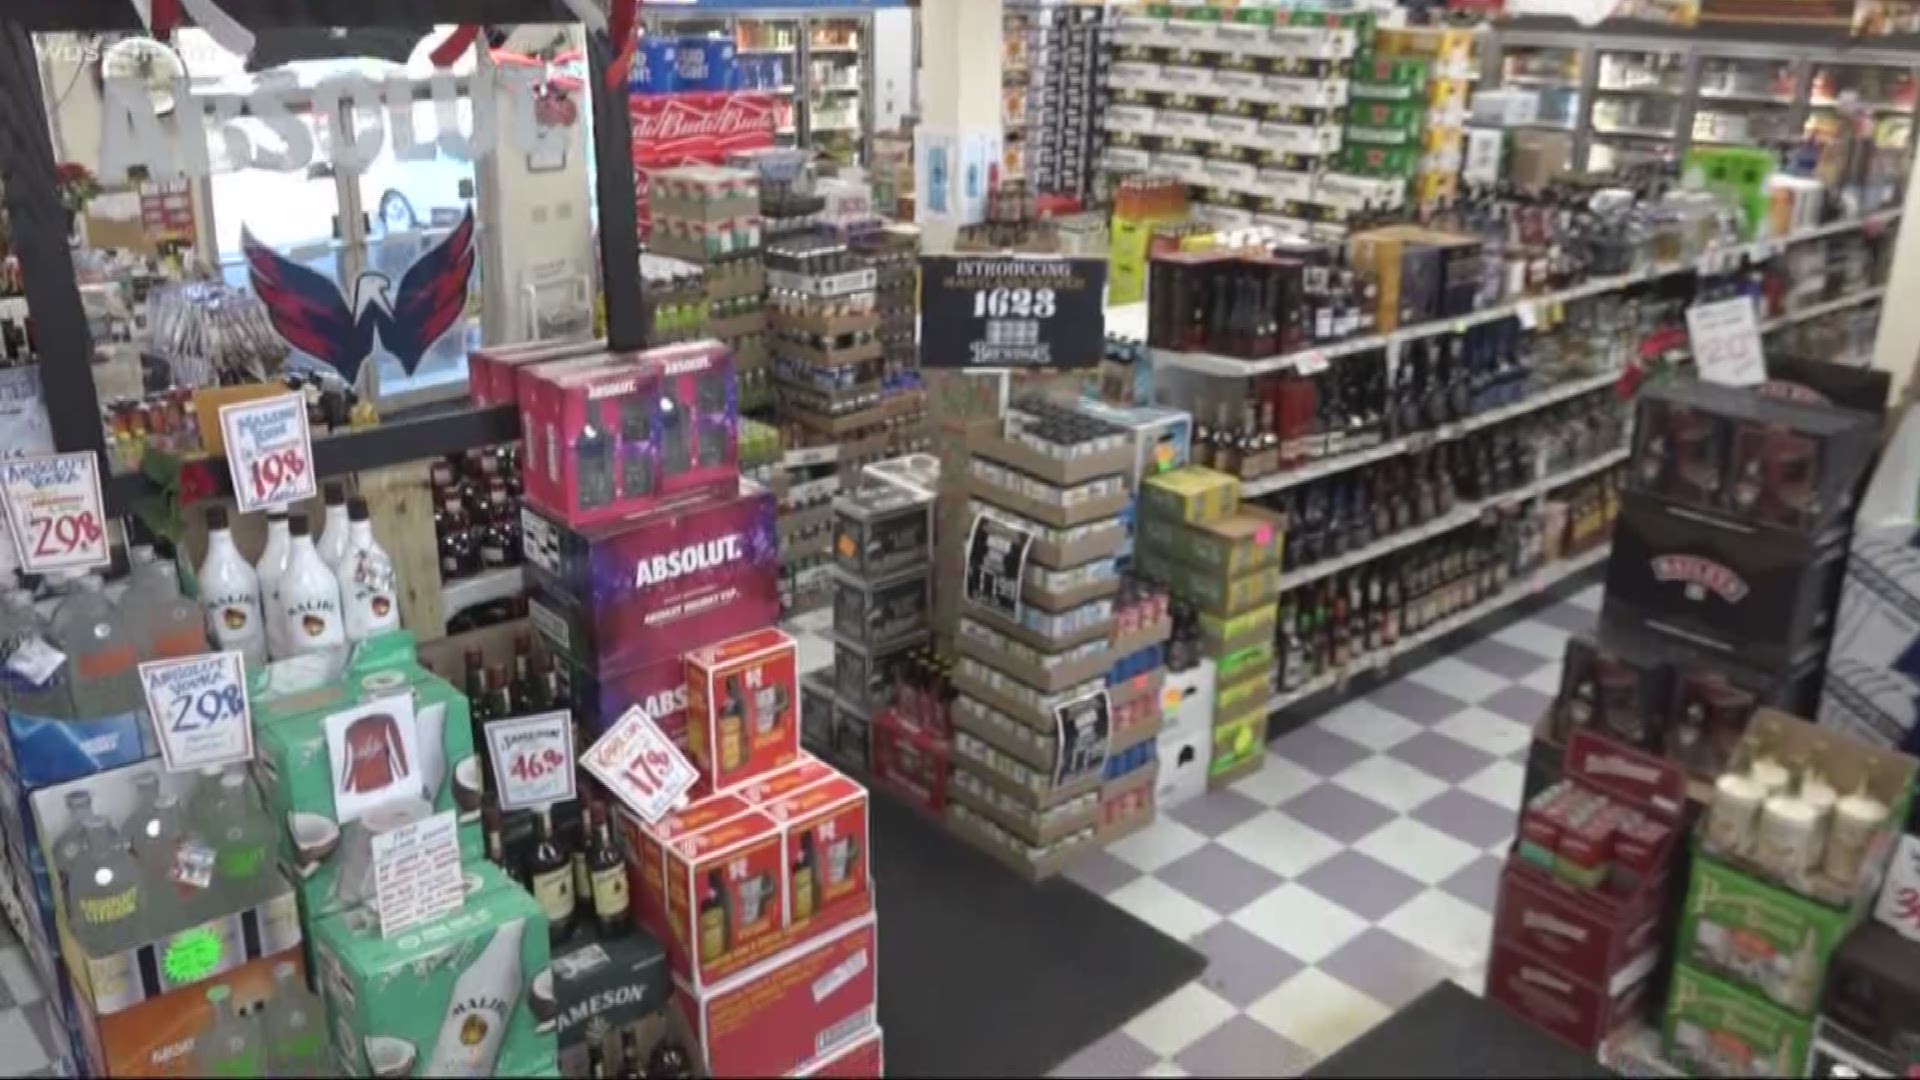 A modest proposal to allow an expansion of alcohol sales limited to three locally-owned groceries in Frederick County Maryland has liquor store owners saying "no!"